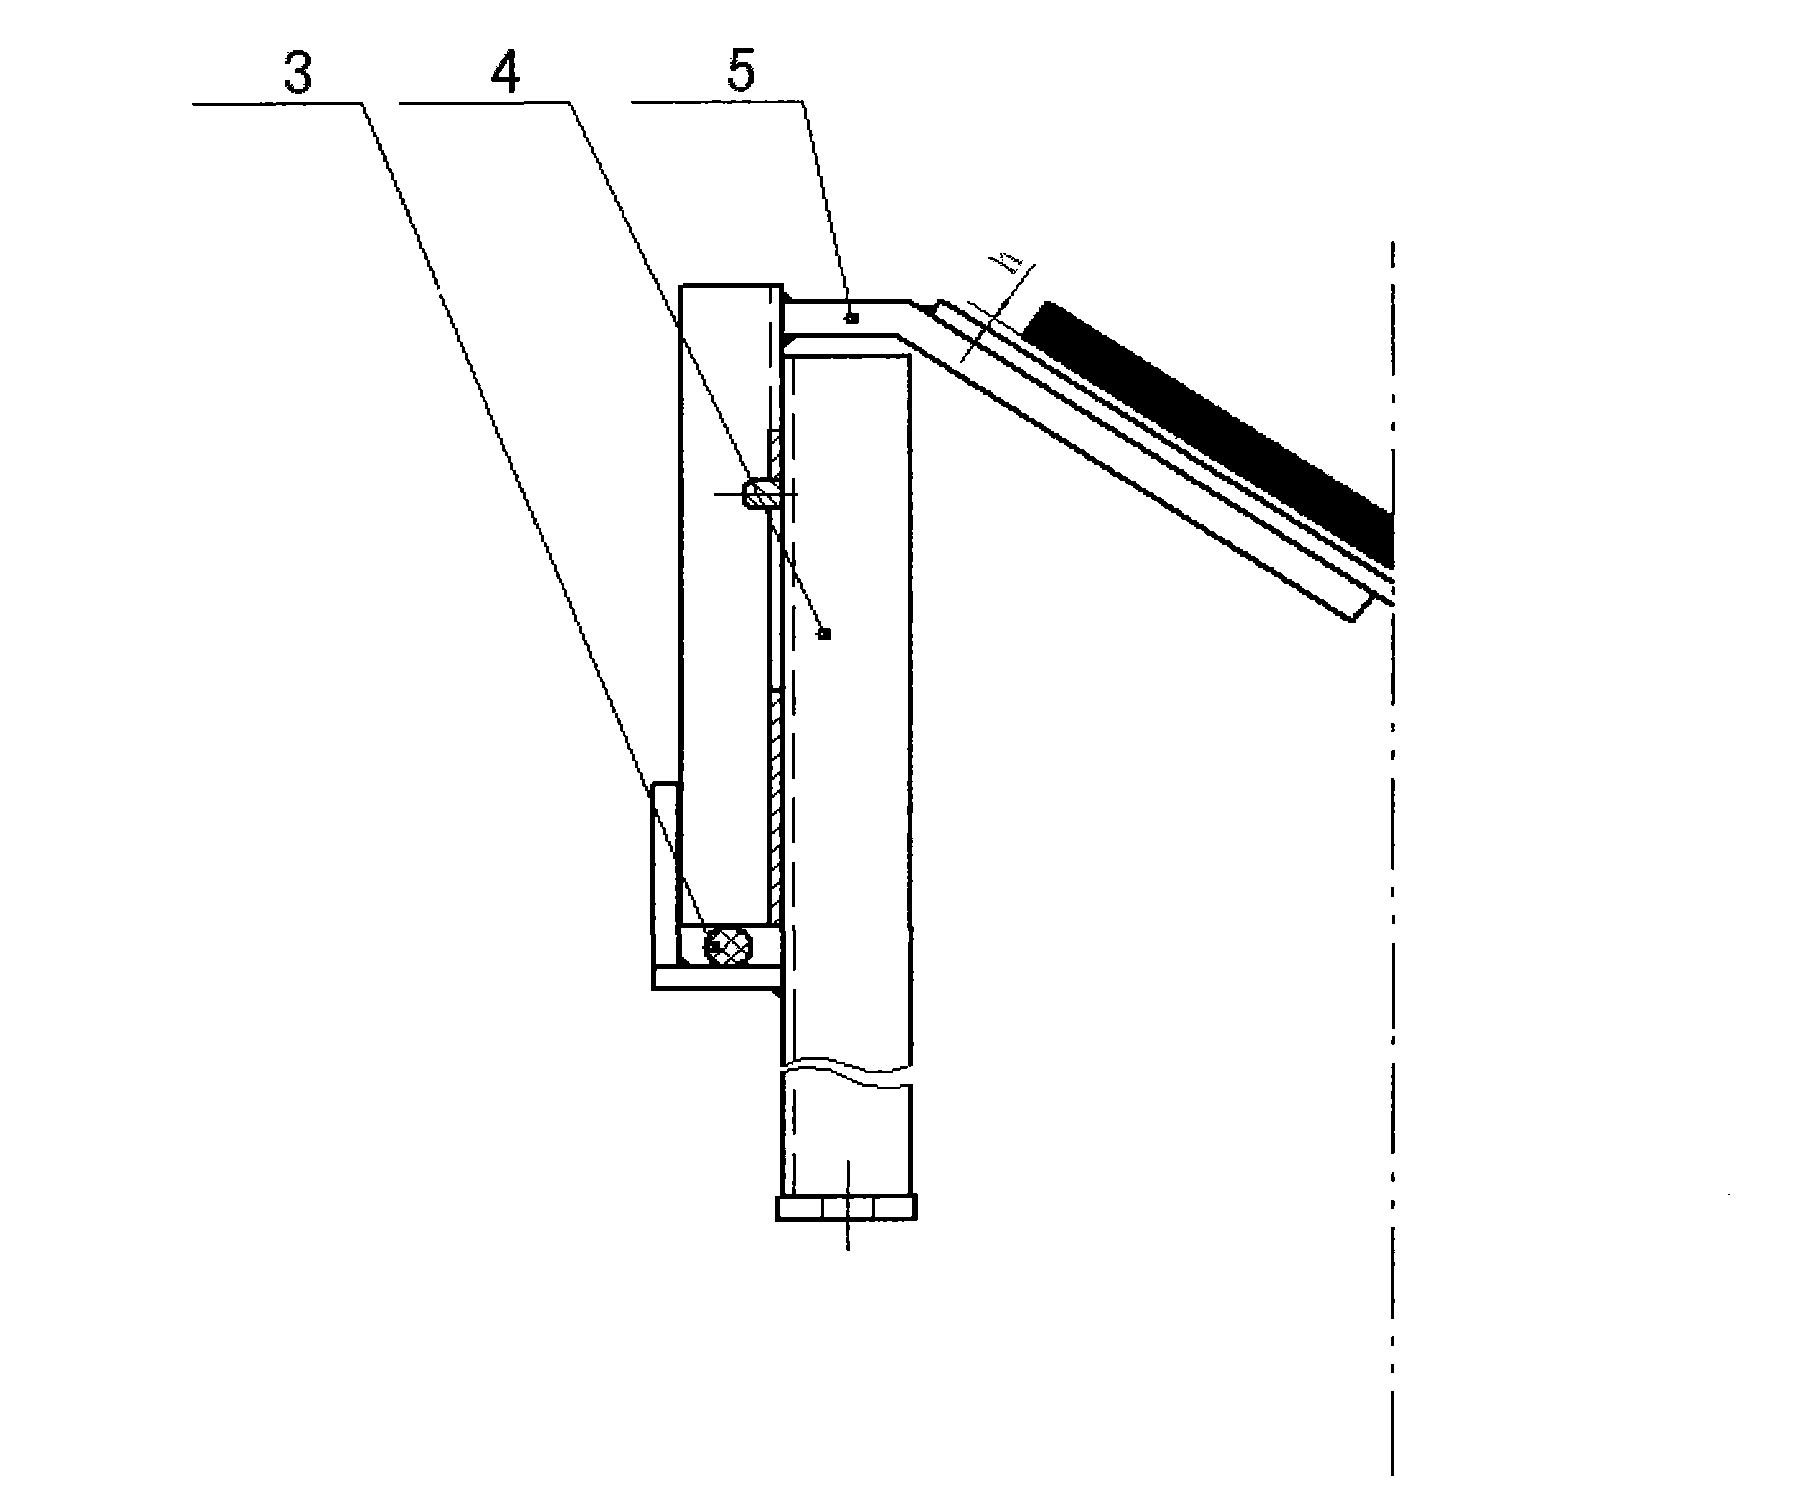 Damping device with controllable hydraulic pressure